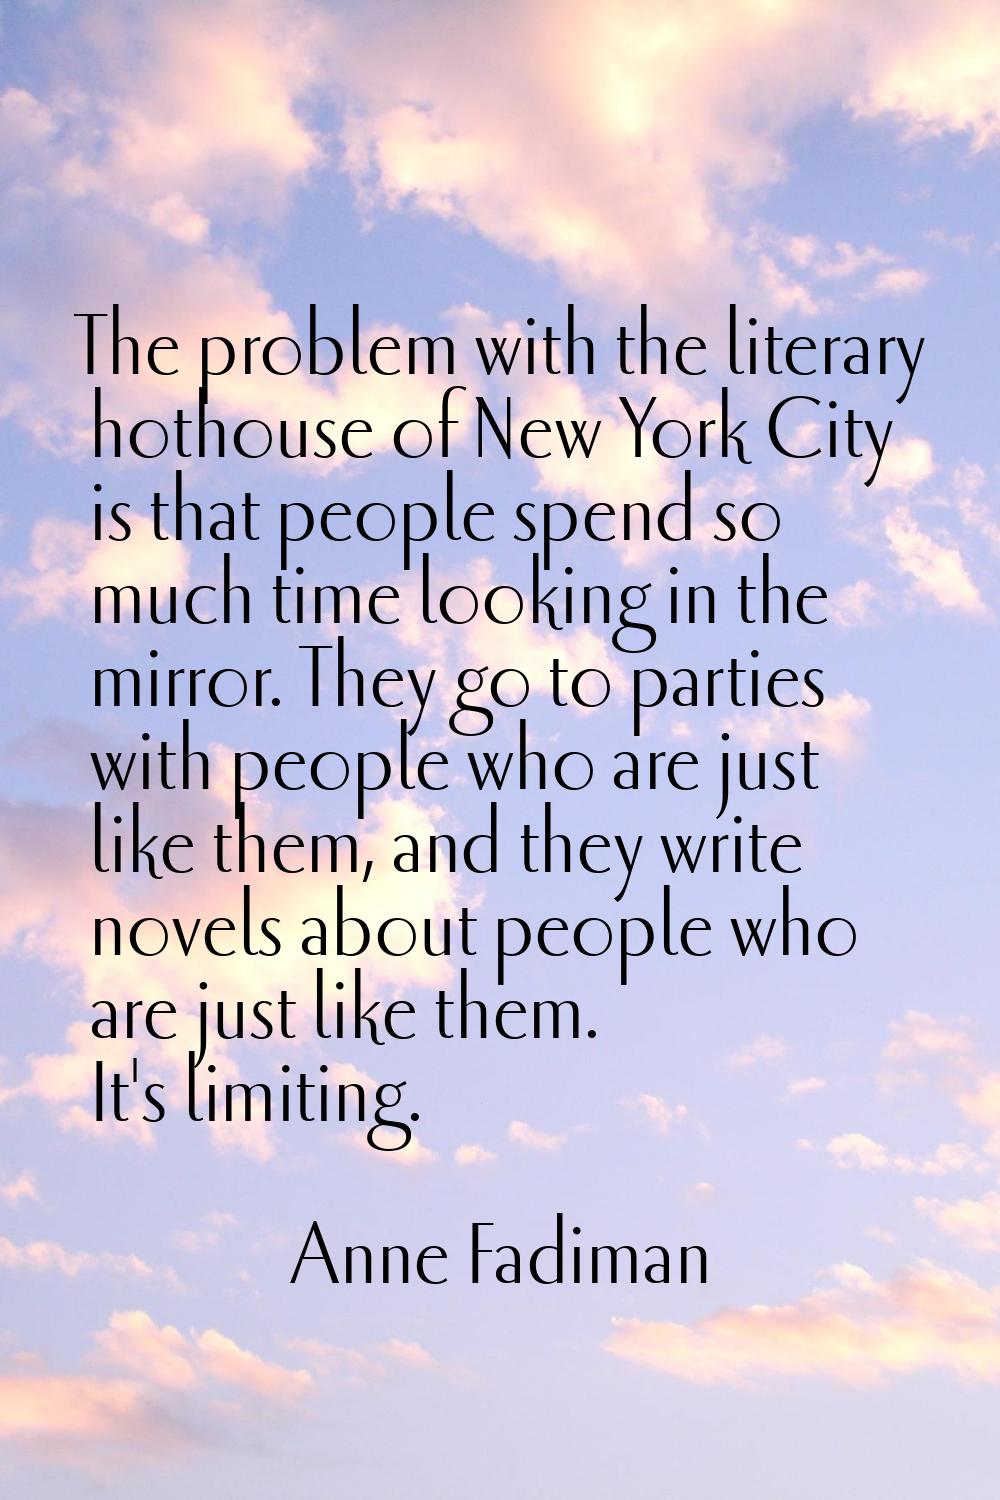 The problem with the literary hothouse of New York City is that people spend so much time looking i